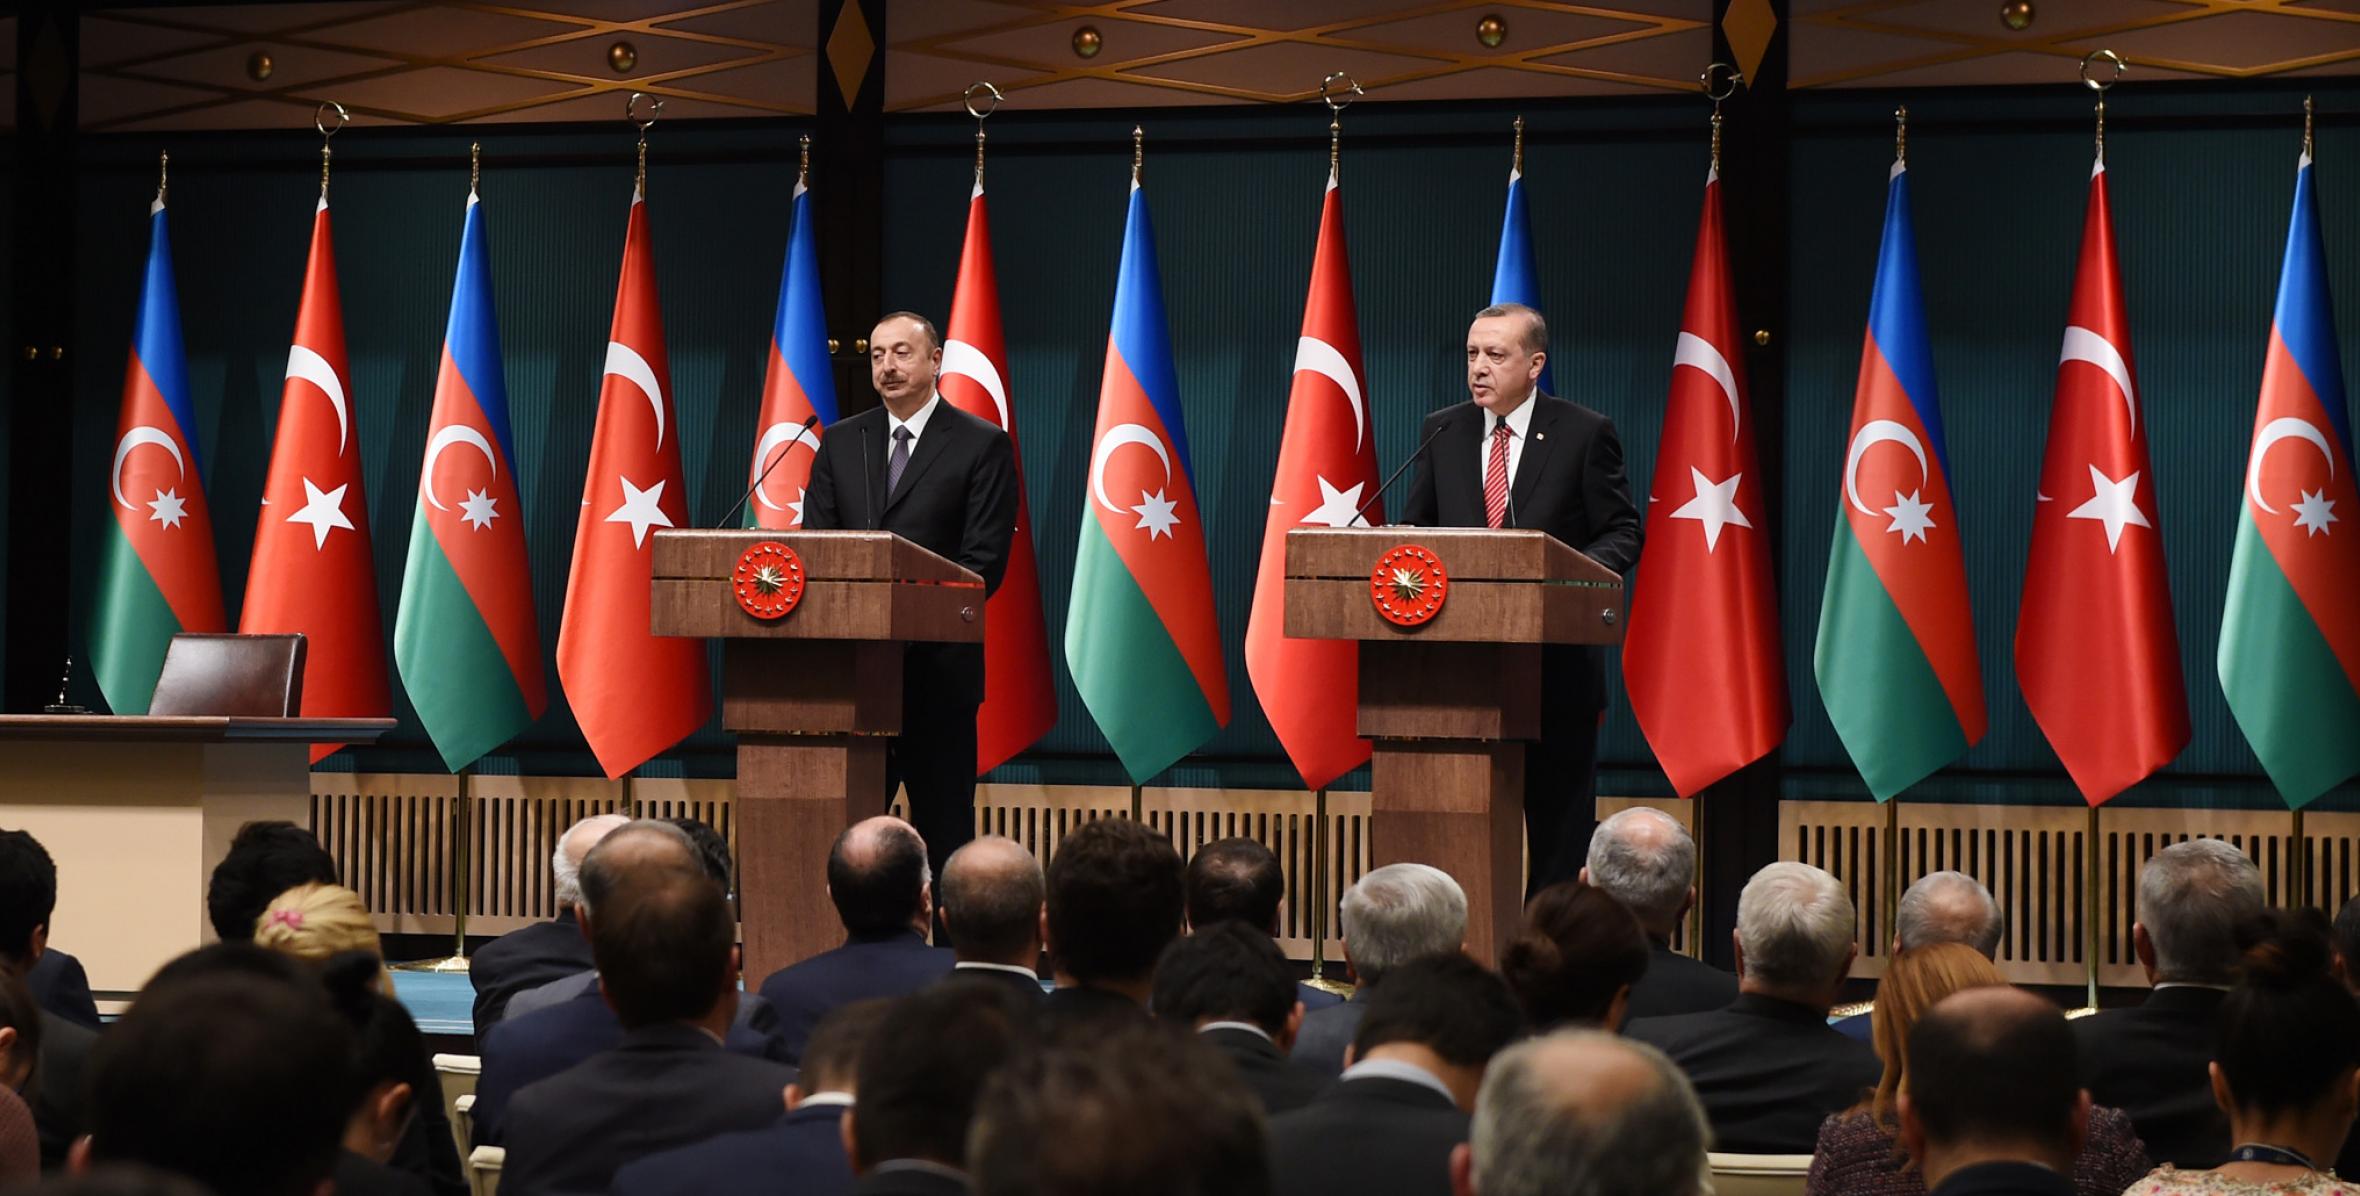 Presidents of Azerbaijan and Turkey made statements for the press